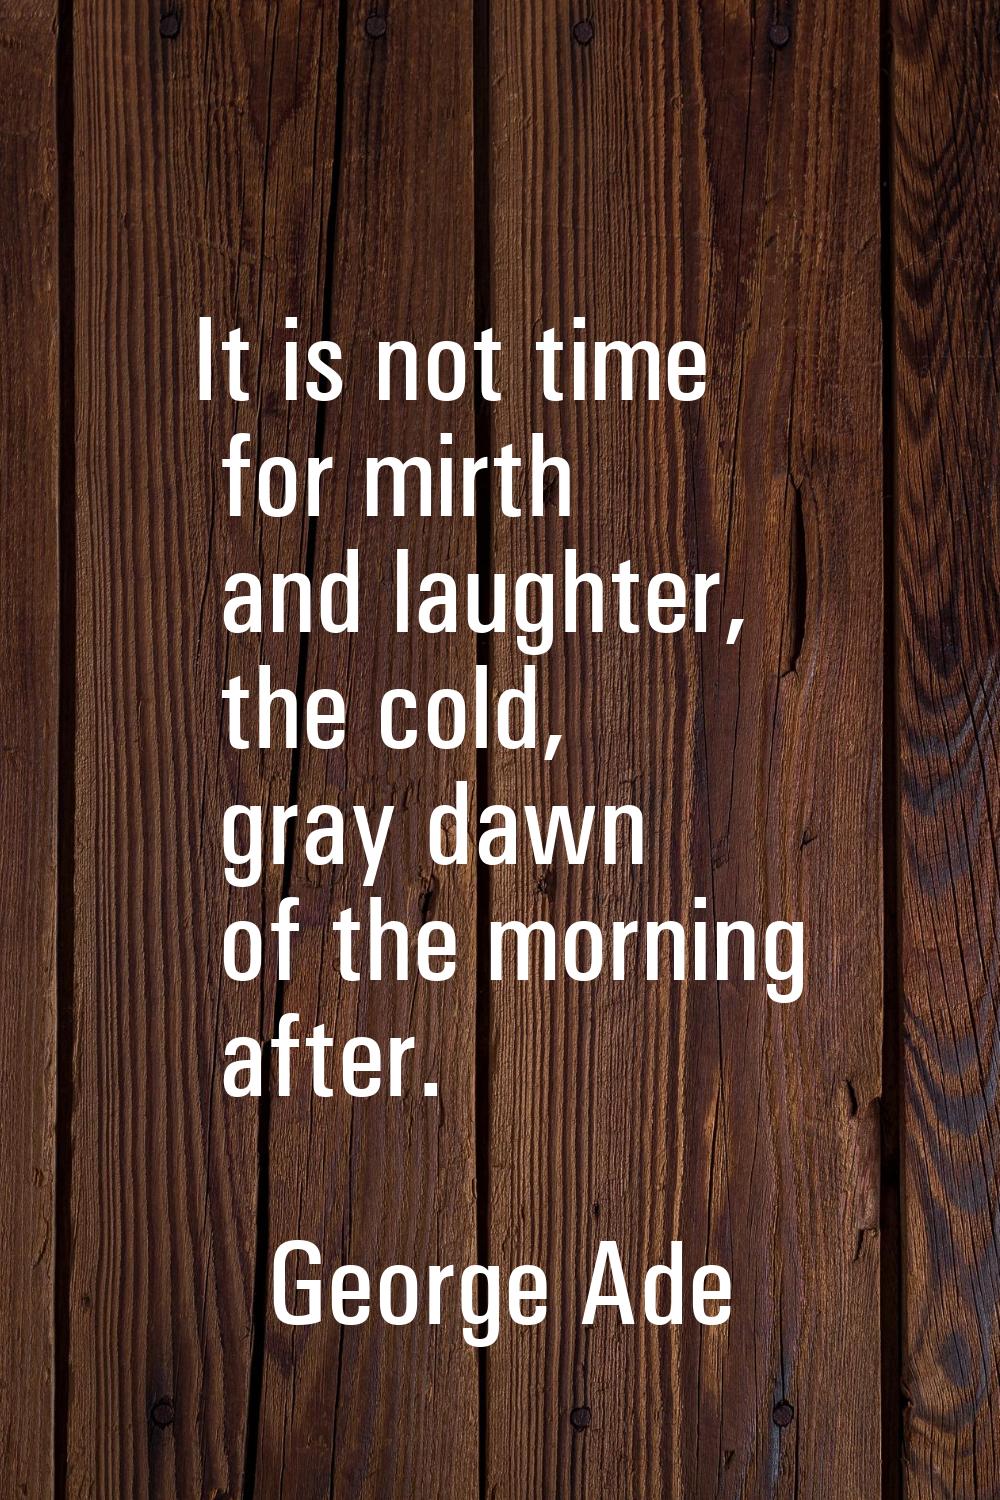 It is not time for mirth and laughter, the cold, gray dawn of the morning after.